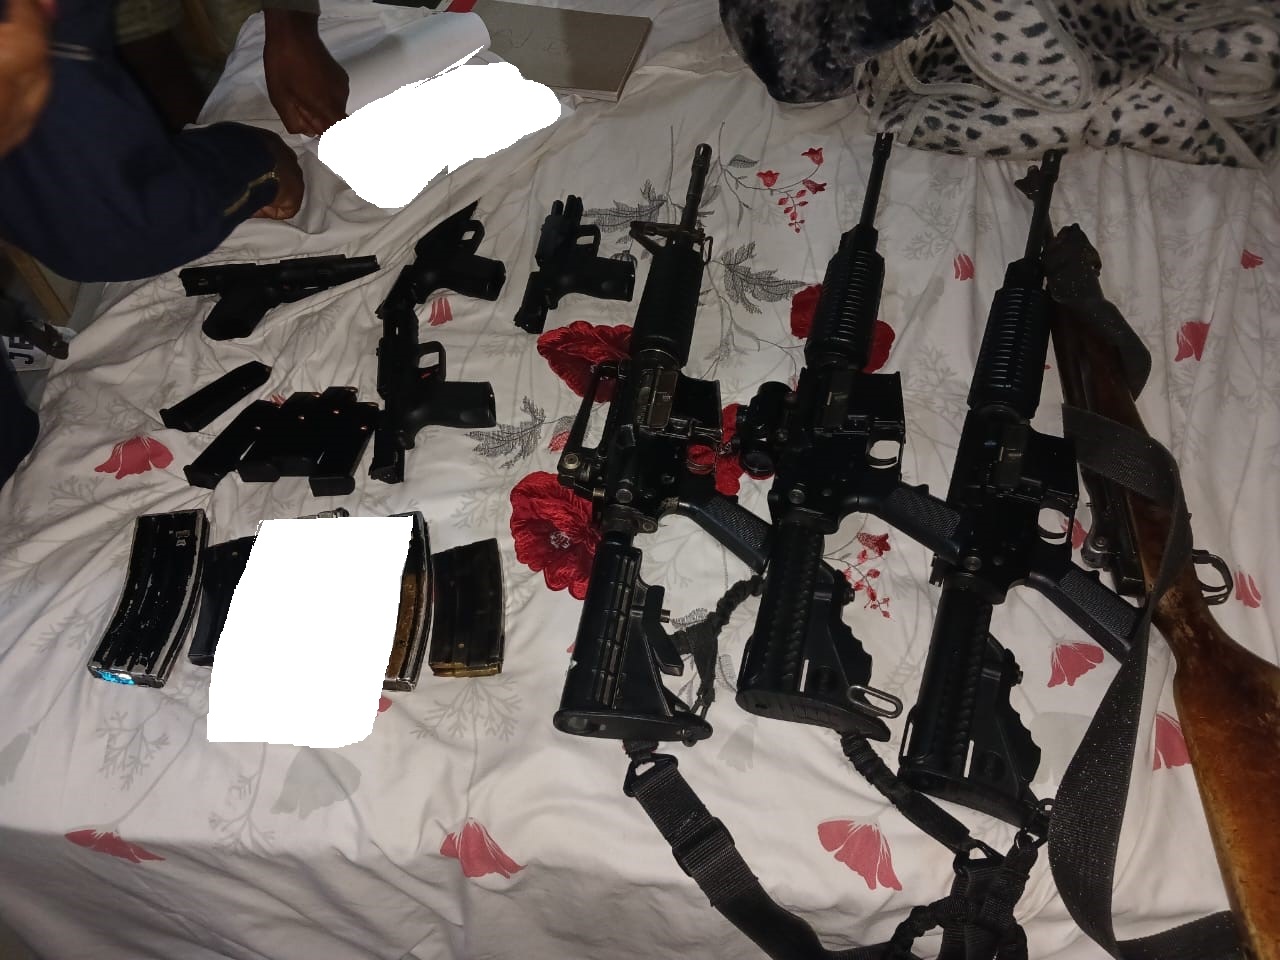 Suspect due in court for illegal possession of firearms and ammunition